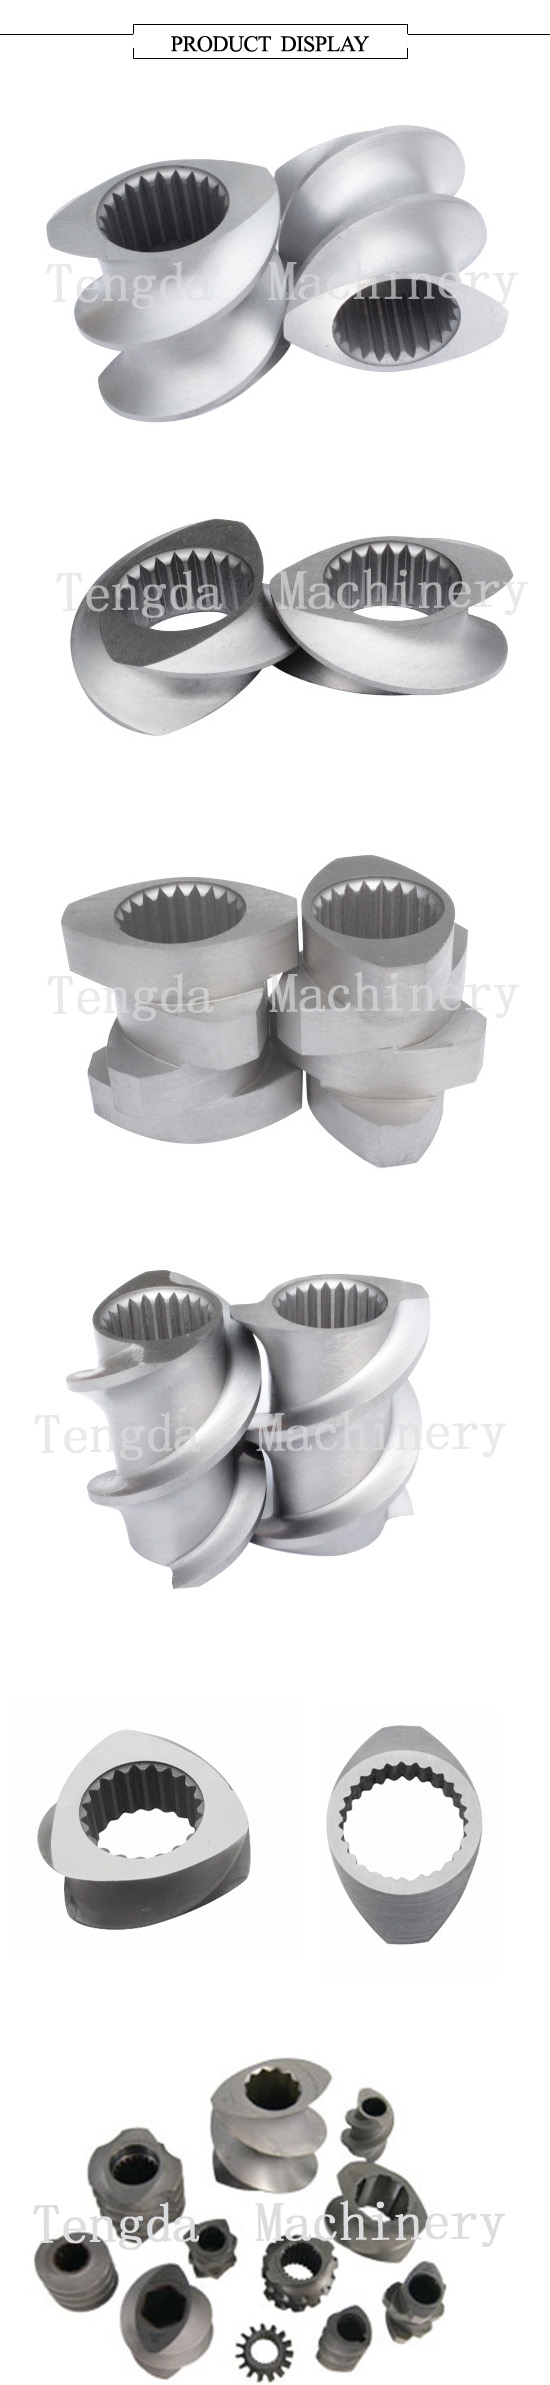 Wear-Resisting Screw Parts for Extrusion Machine